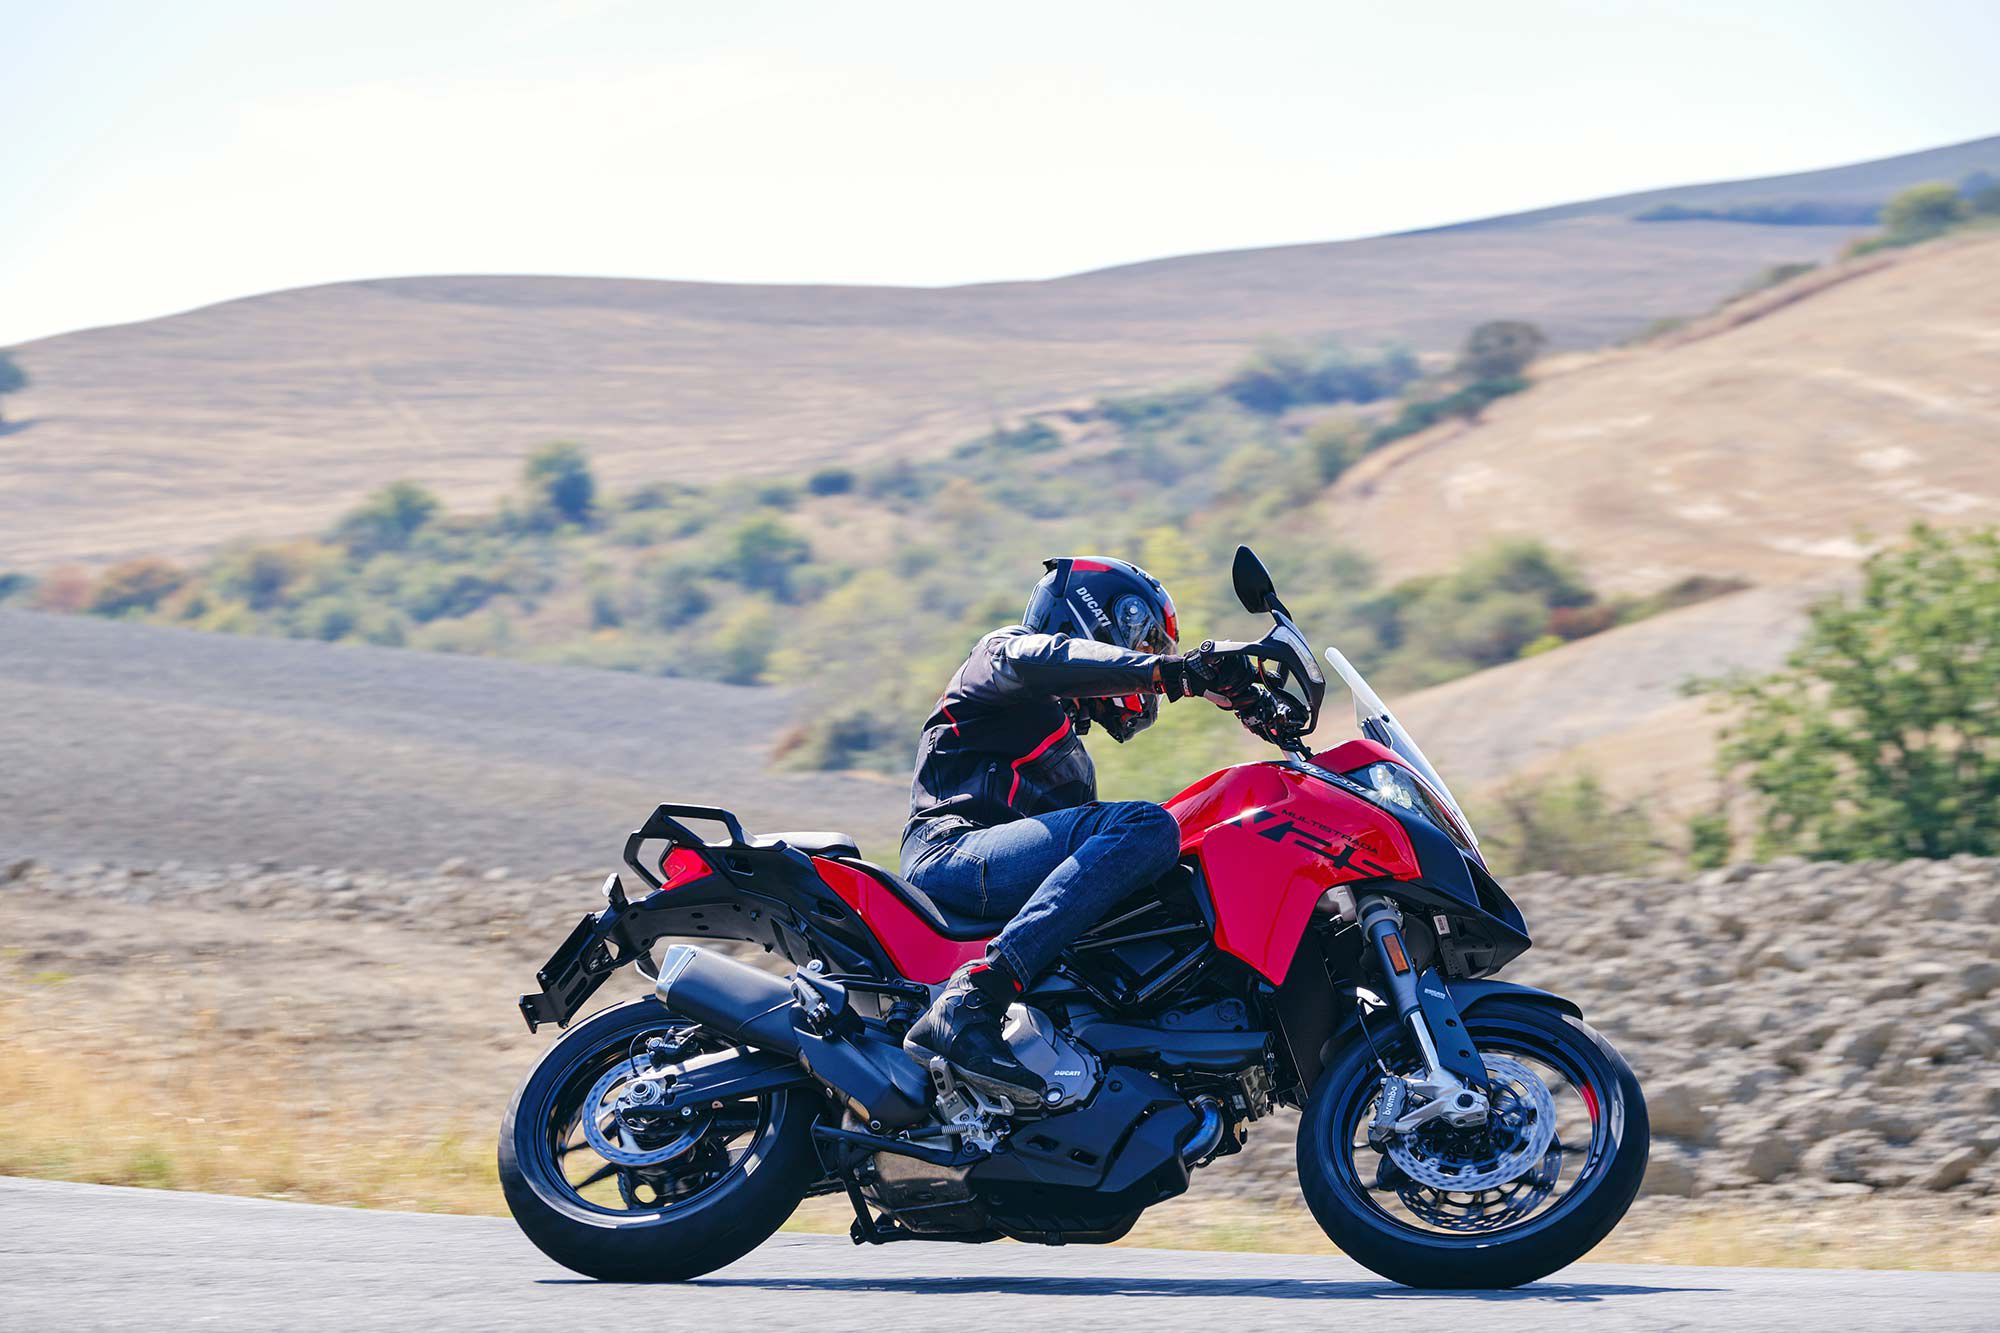 A host of electronic aids including Cornering ABS come standard on both versions of the Multistrada V2.